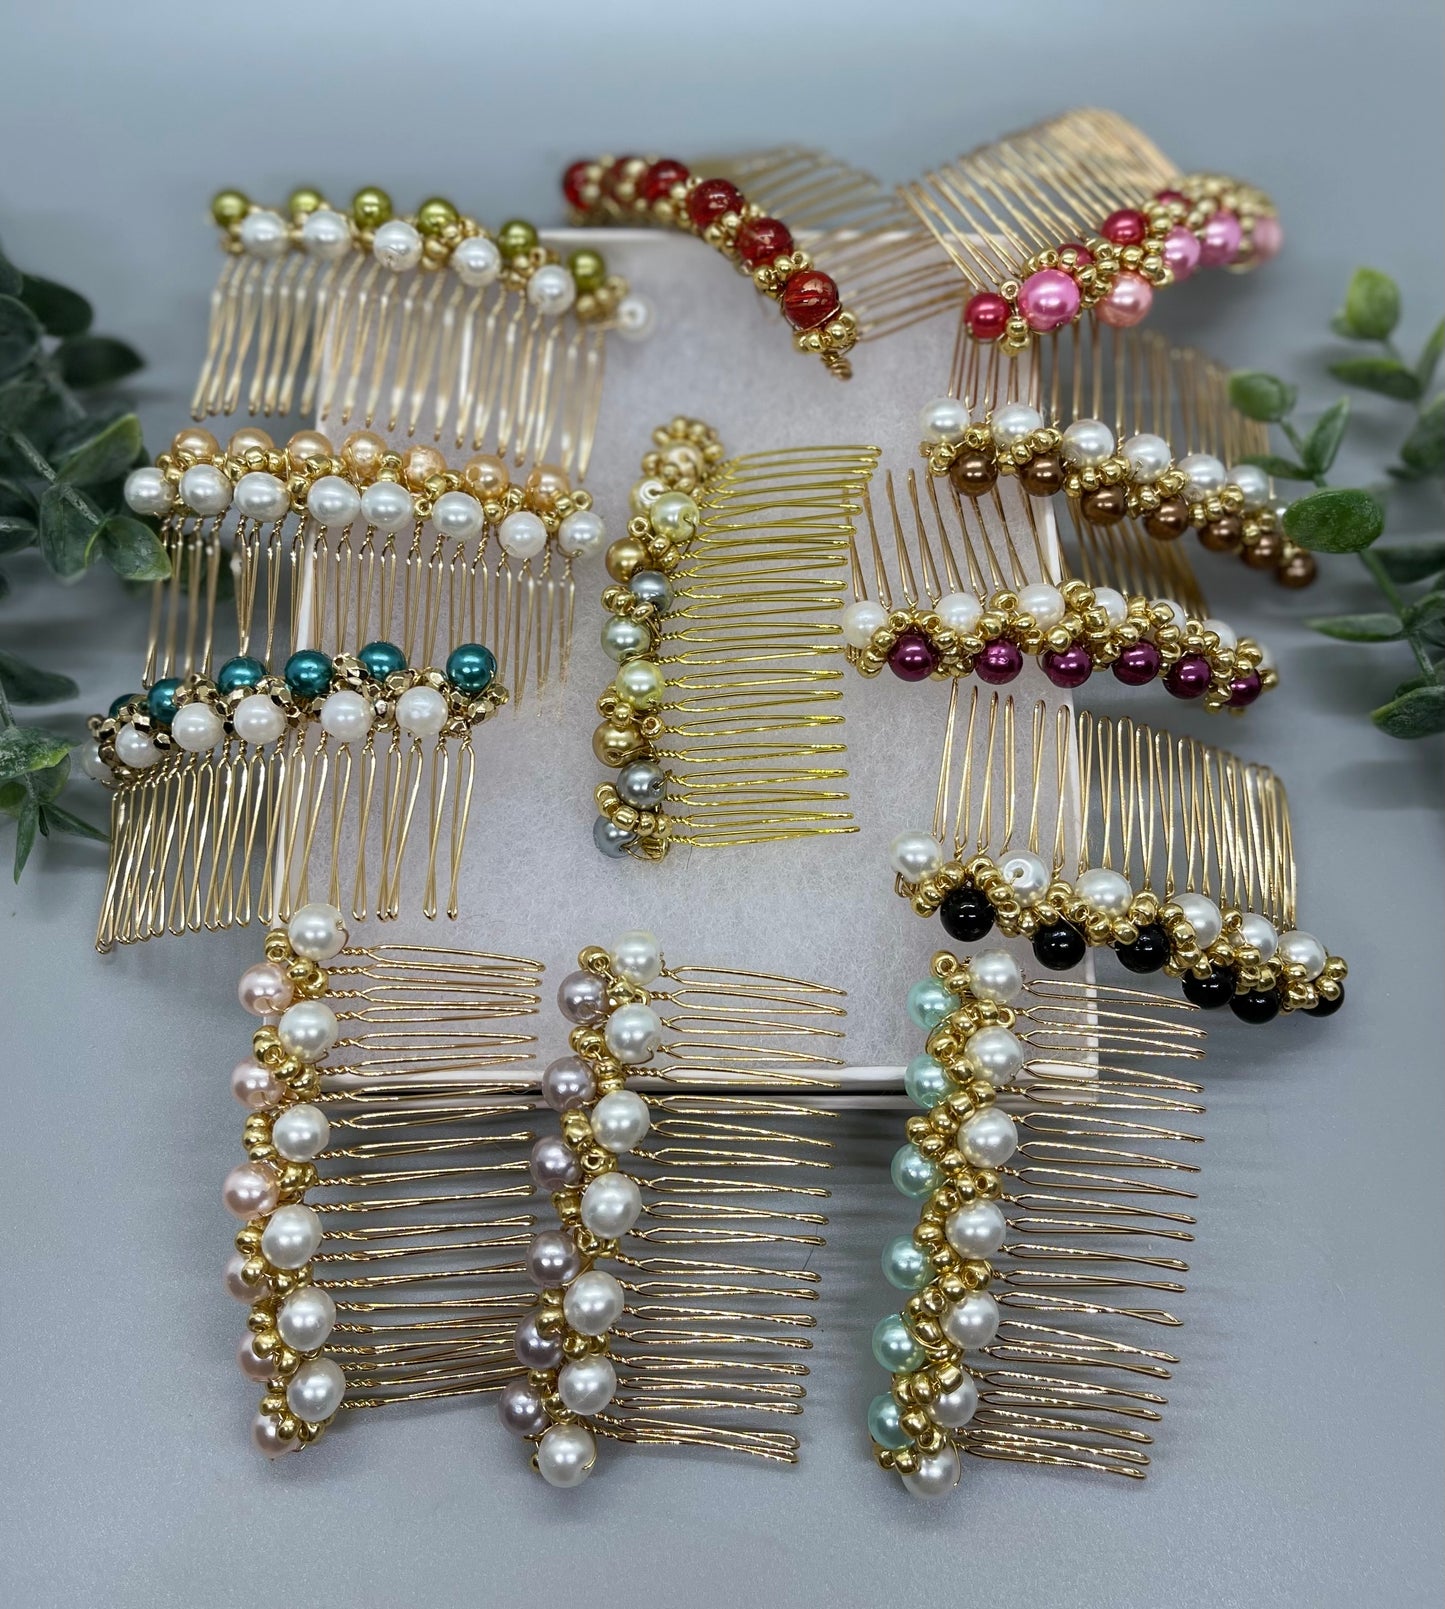 Copper White  gold beaded side Comb 3.5” gold Metal hair Accessories bridesmaid birthday princess wedding gift handmade accessories